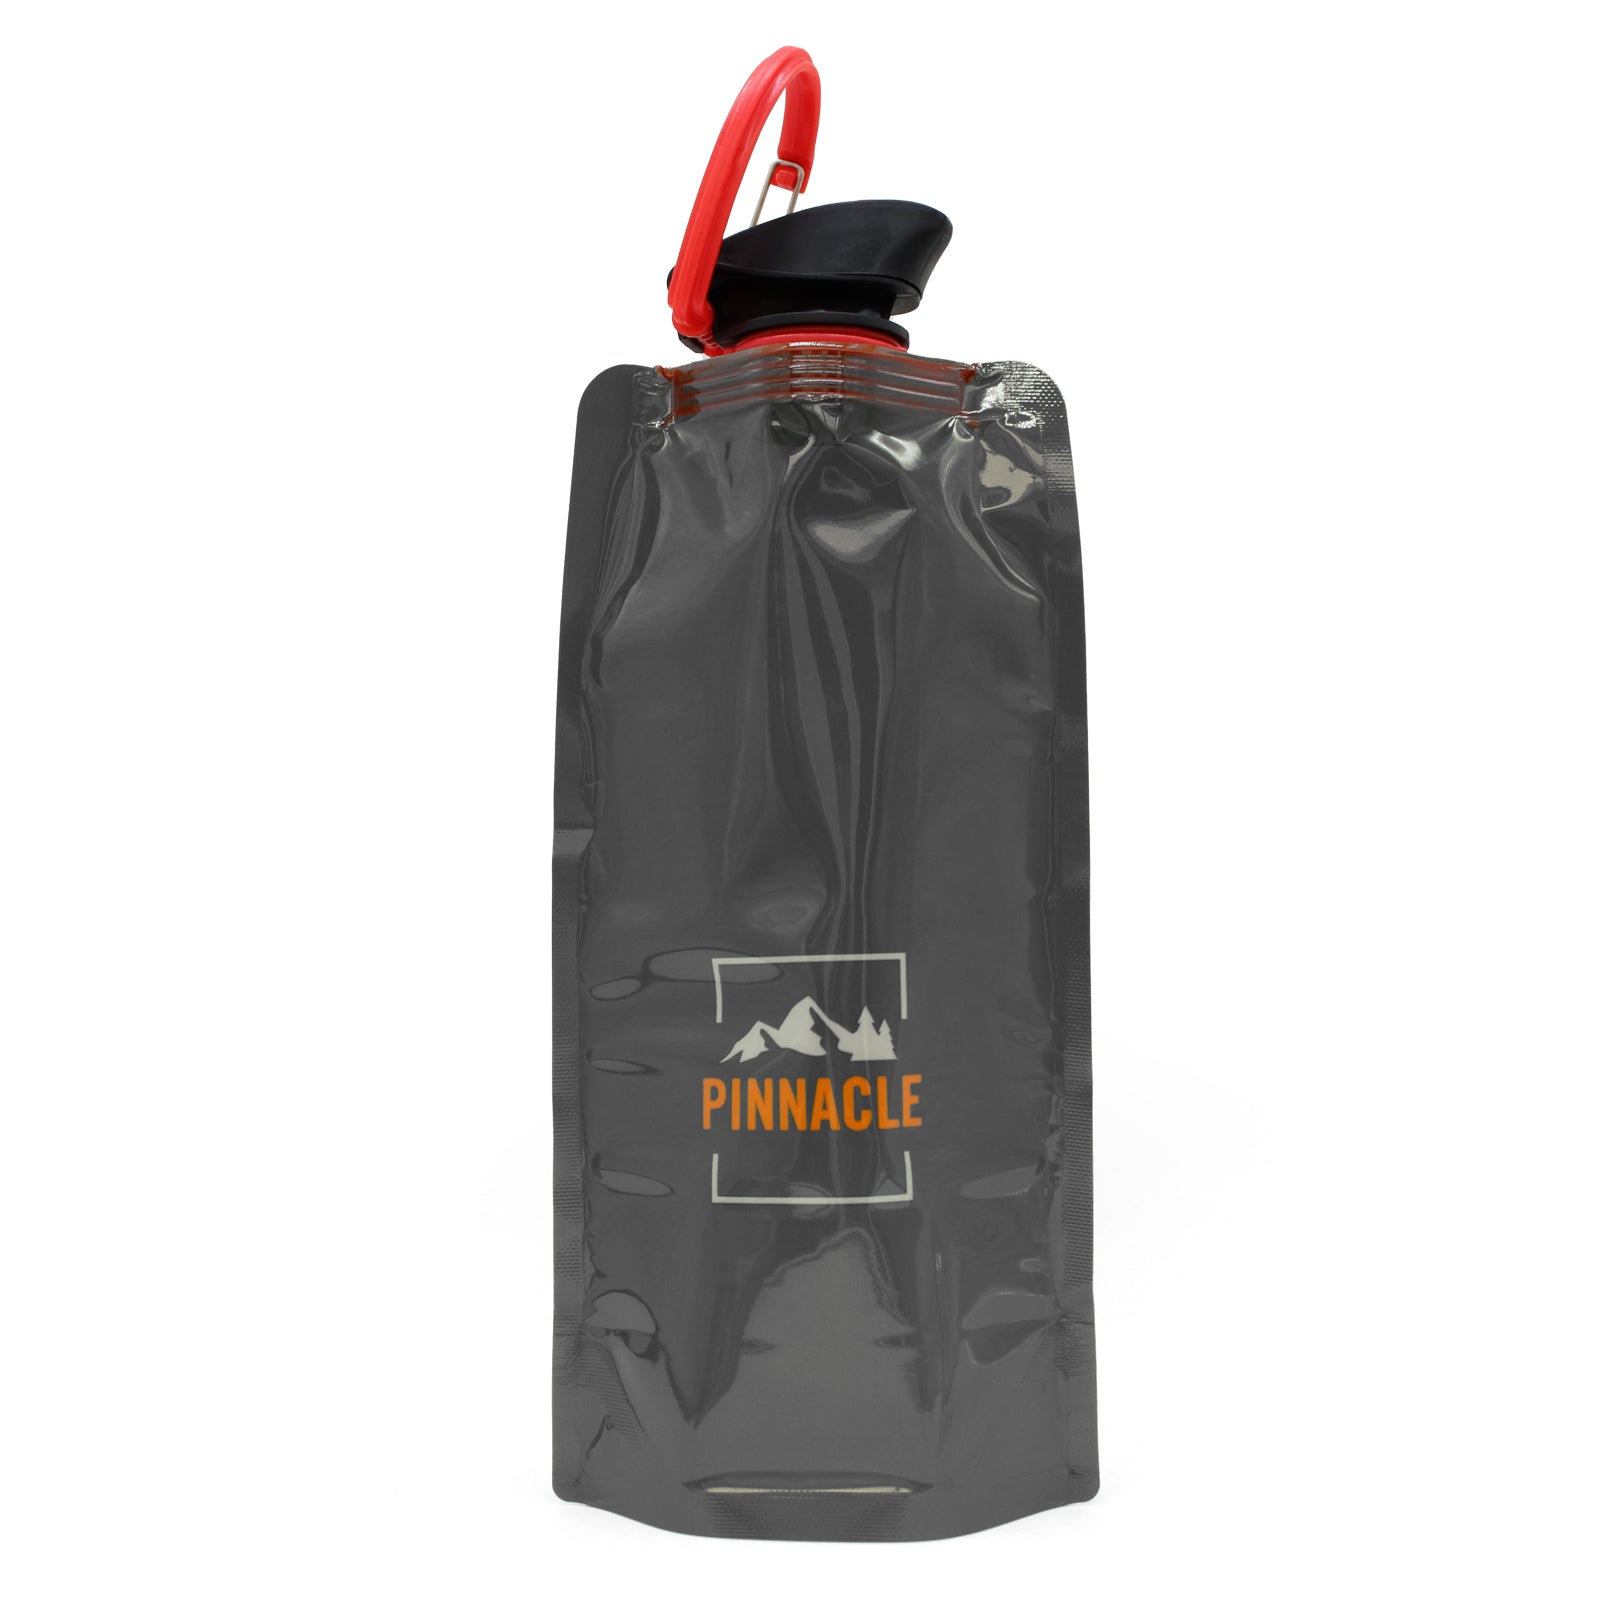 Pinnacle Collapsible Water Bottle in Grey